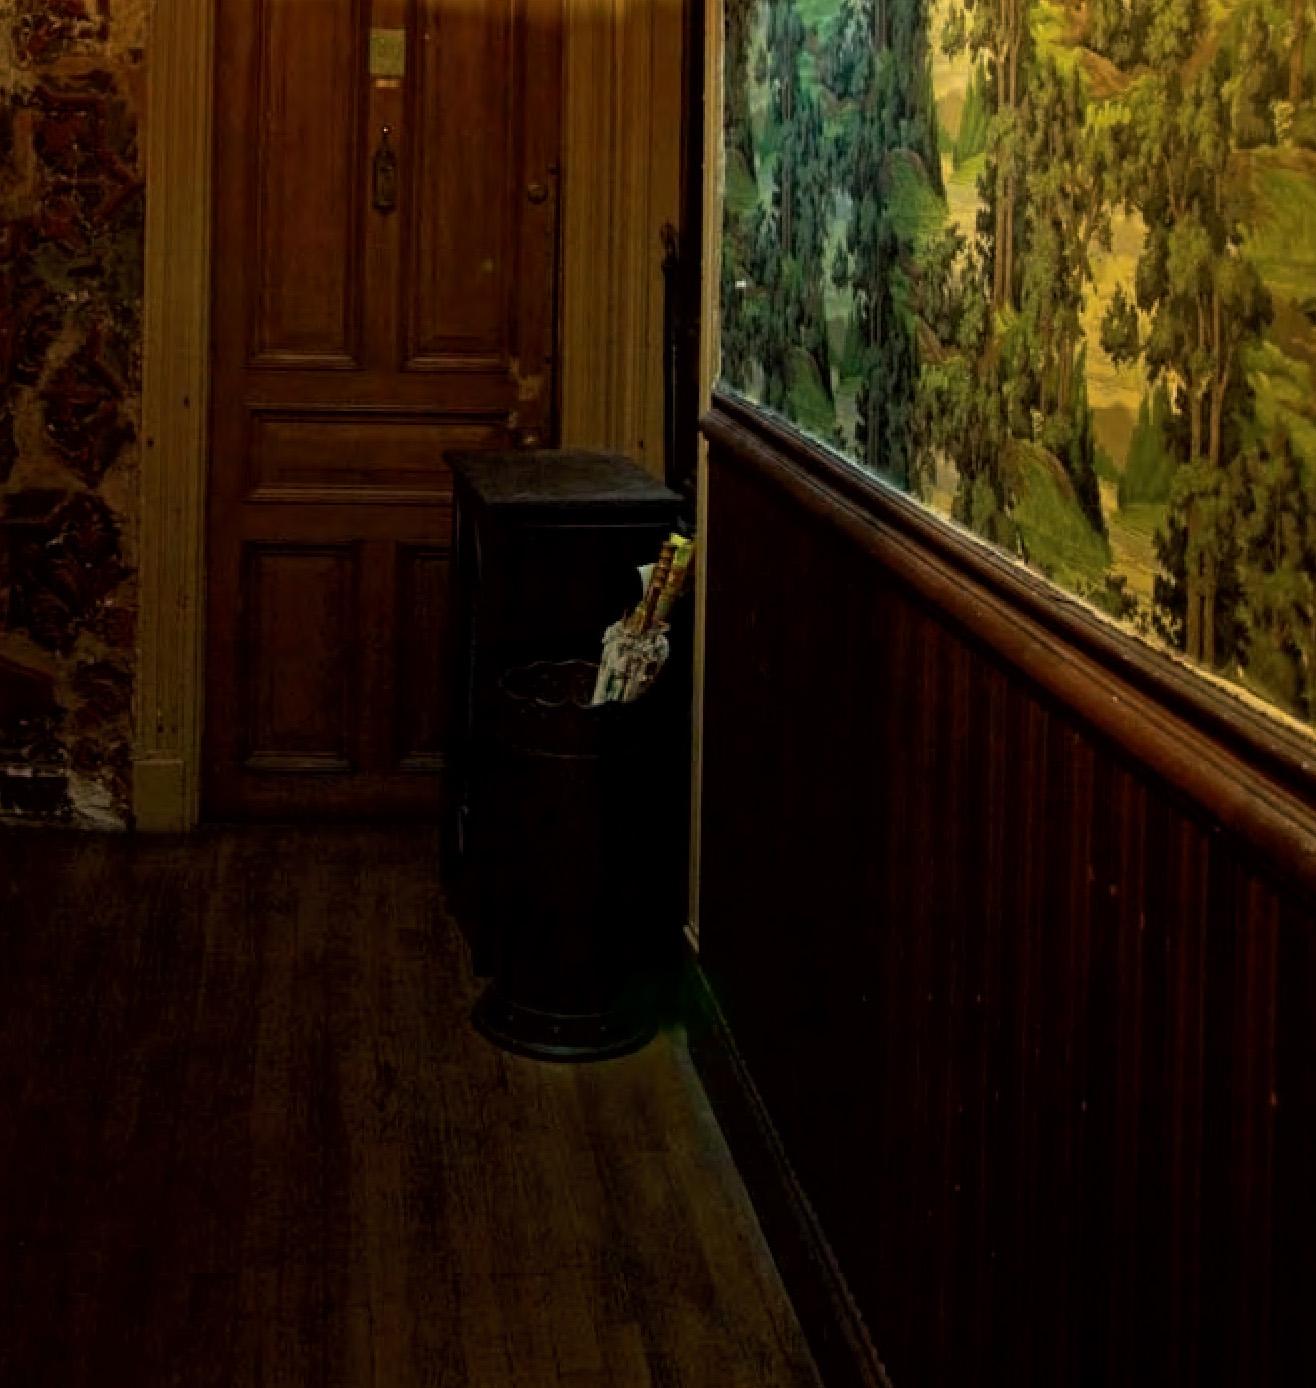 Hotel Chelsea, New York. Interiors Hall, Third Floor - Contemporary Photograph by Victoria Cohen